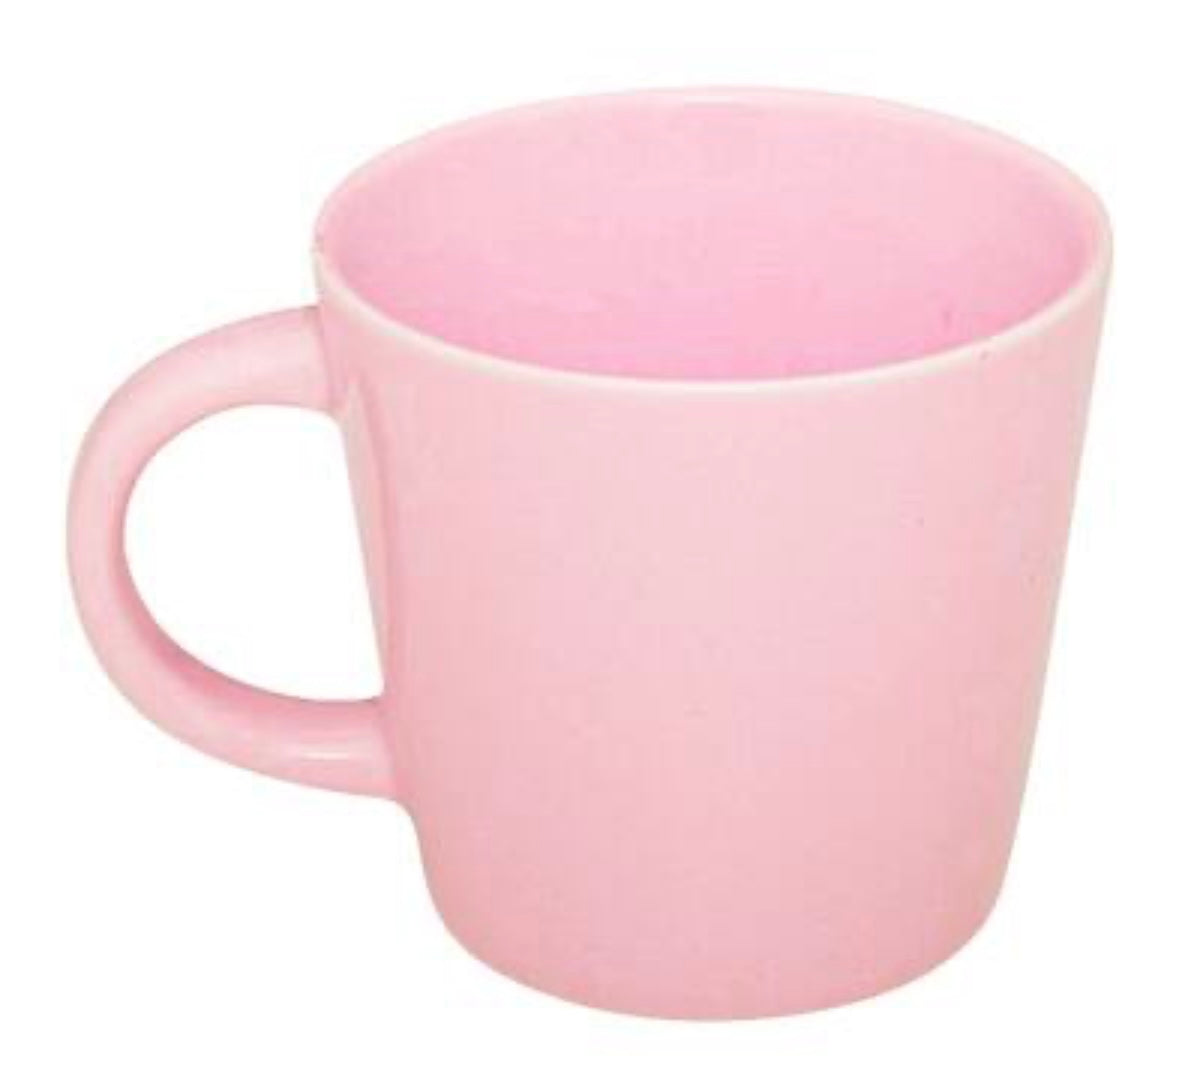 Vondels - Cappuccino Mok AMOUR soft pink 250ml - RUBY Conceptstore 